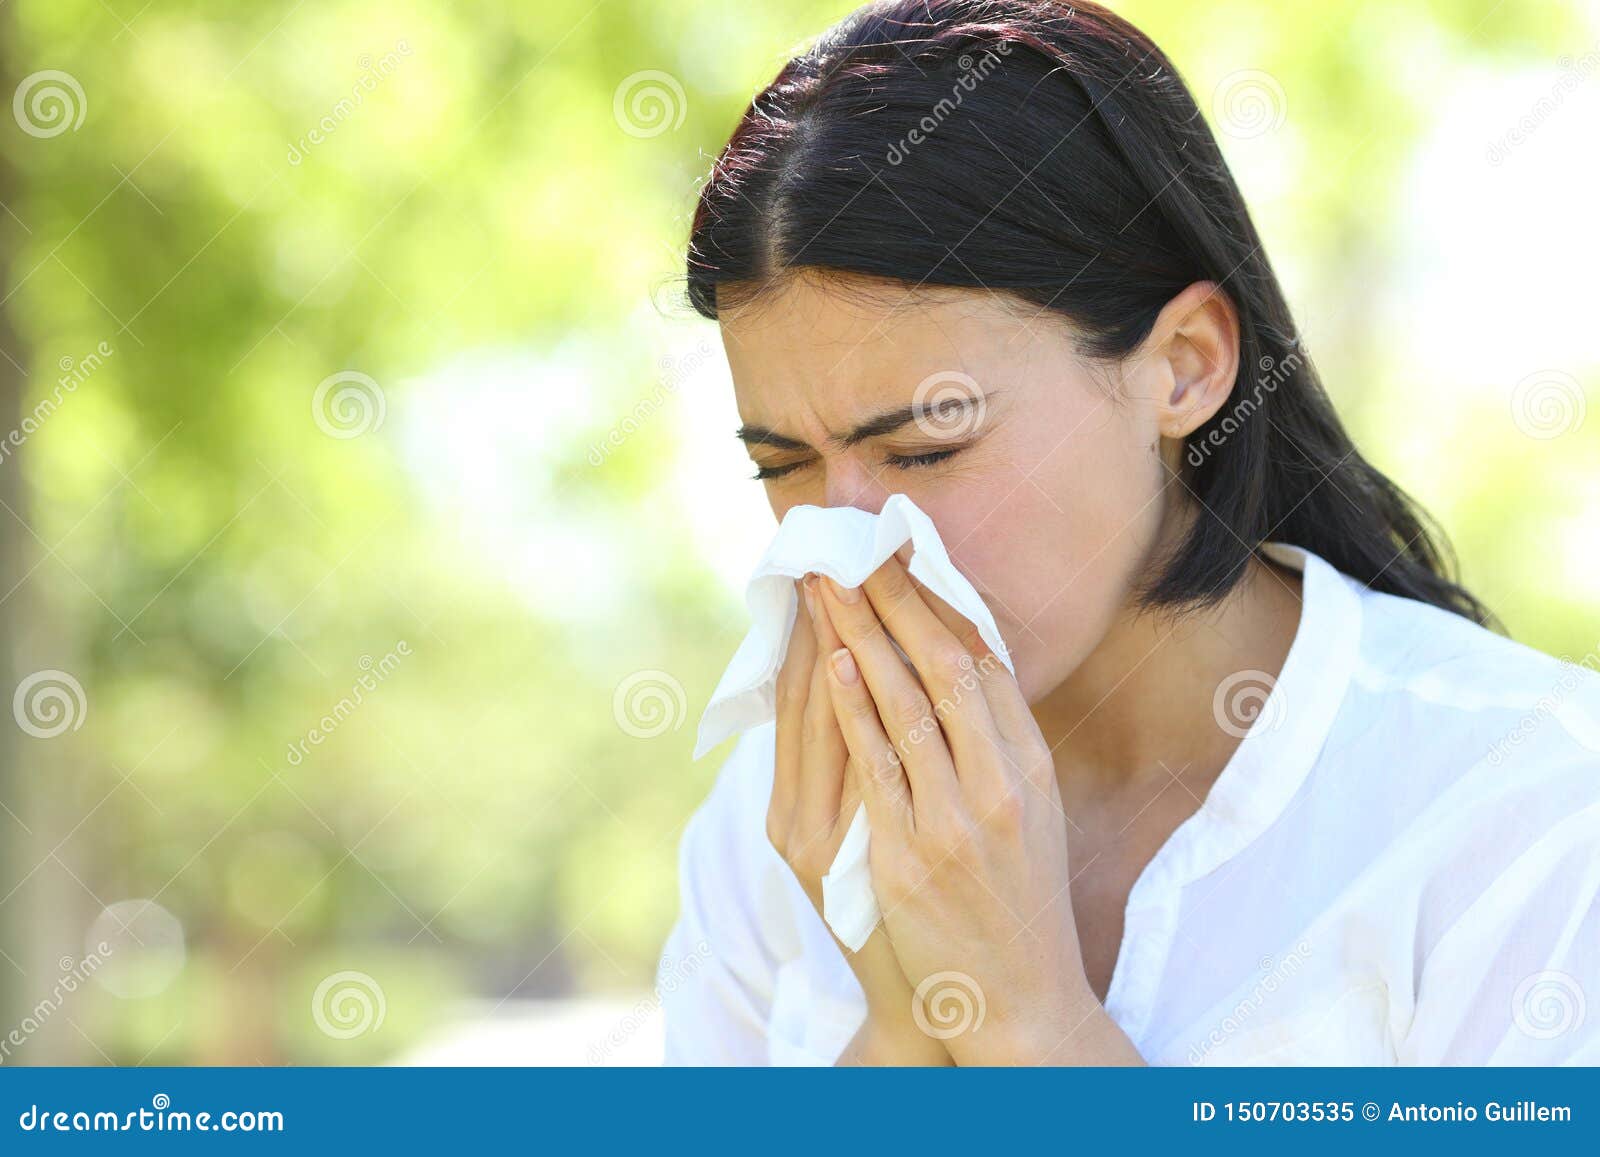 ill woman sneezing covering mouth with a wipe in a park